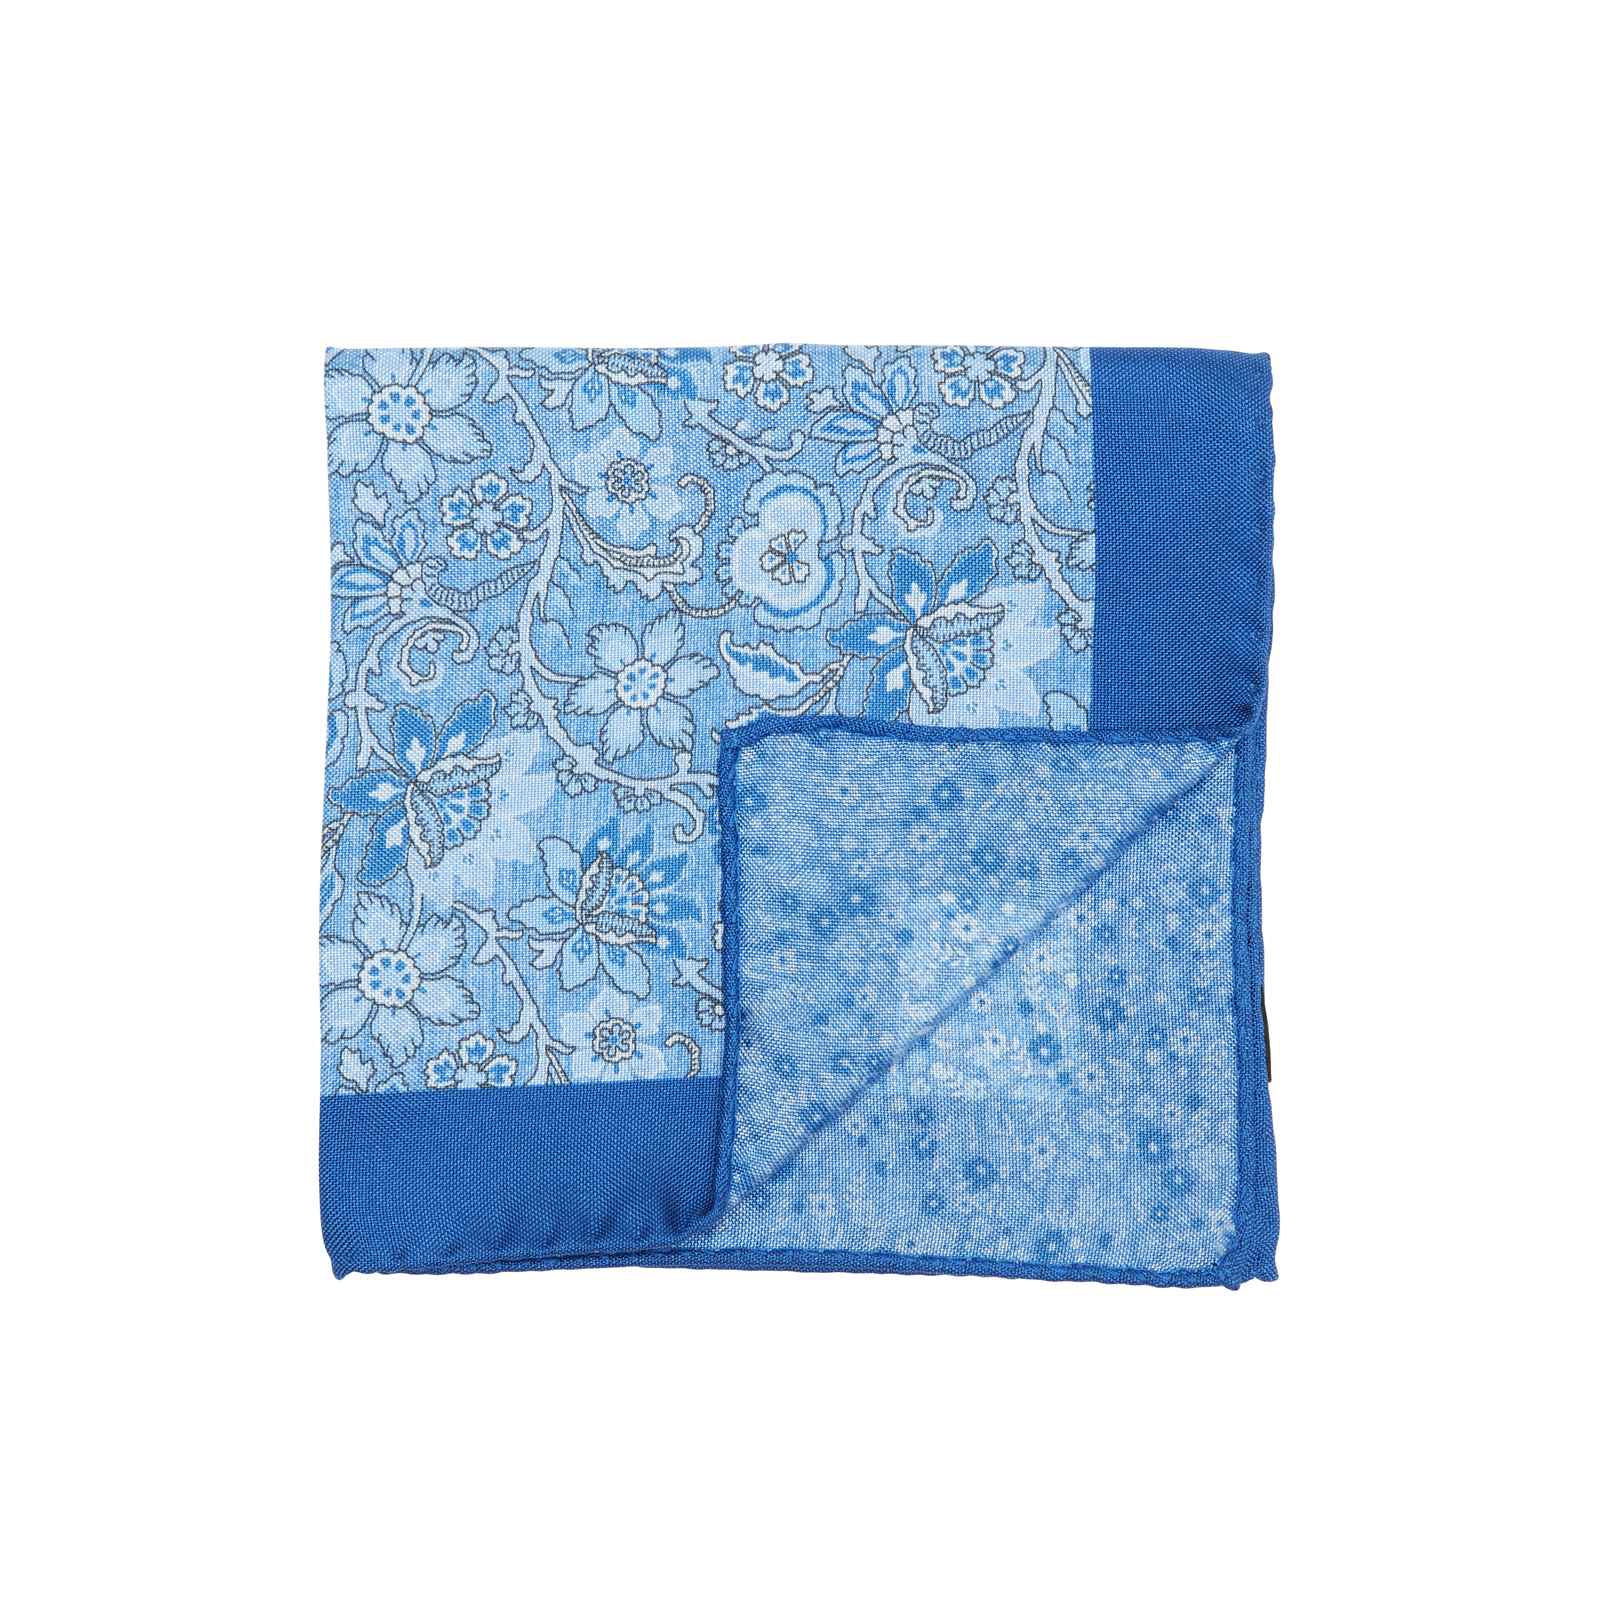 Navy and Light Blue Double Sided Pocket Square w/ Large and Small Flowers